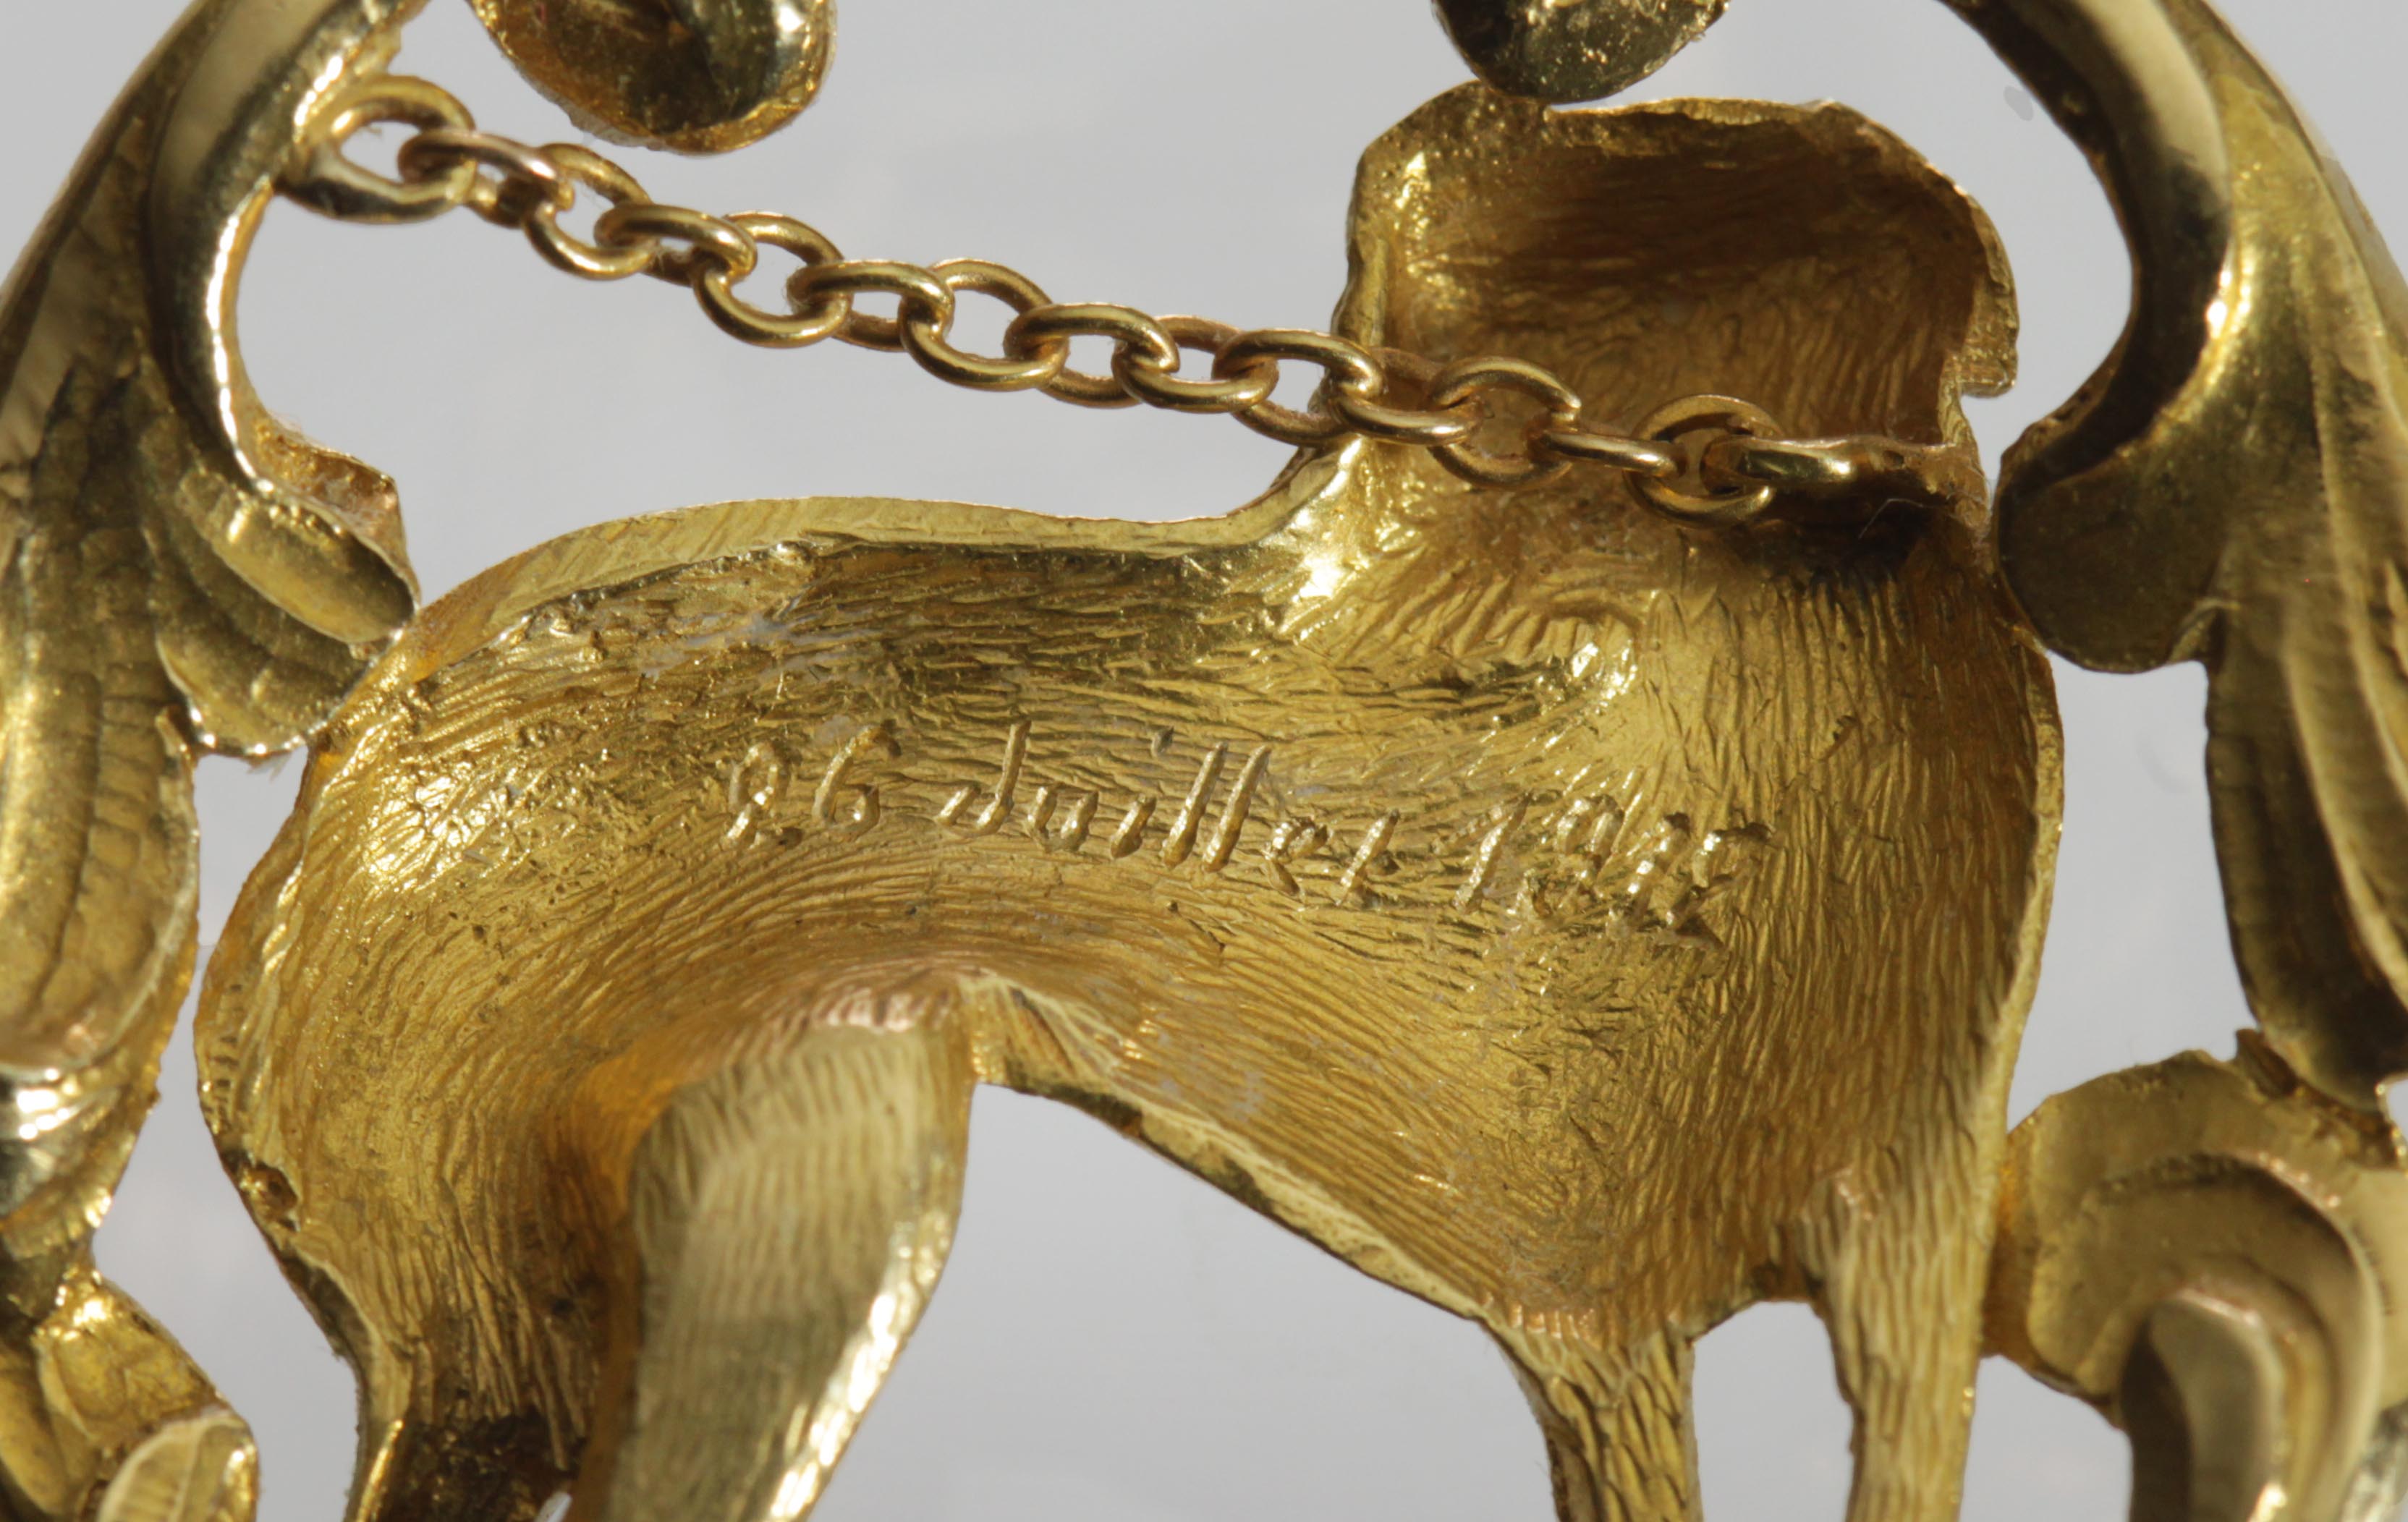 Click for larger image: Circa 1910, French 18 carat gold Levrier / Greyhound / Whippet pendant - Circa 1910, French 18 carat gold Levrier / Greyhound / Whippet pendant